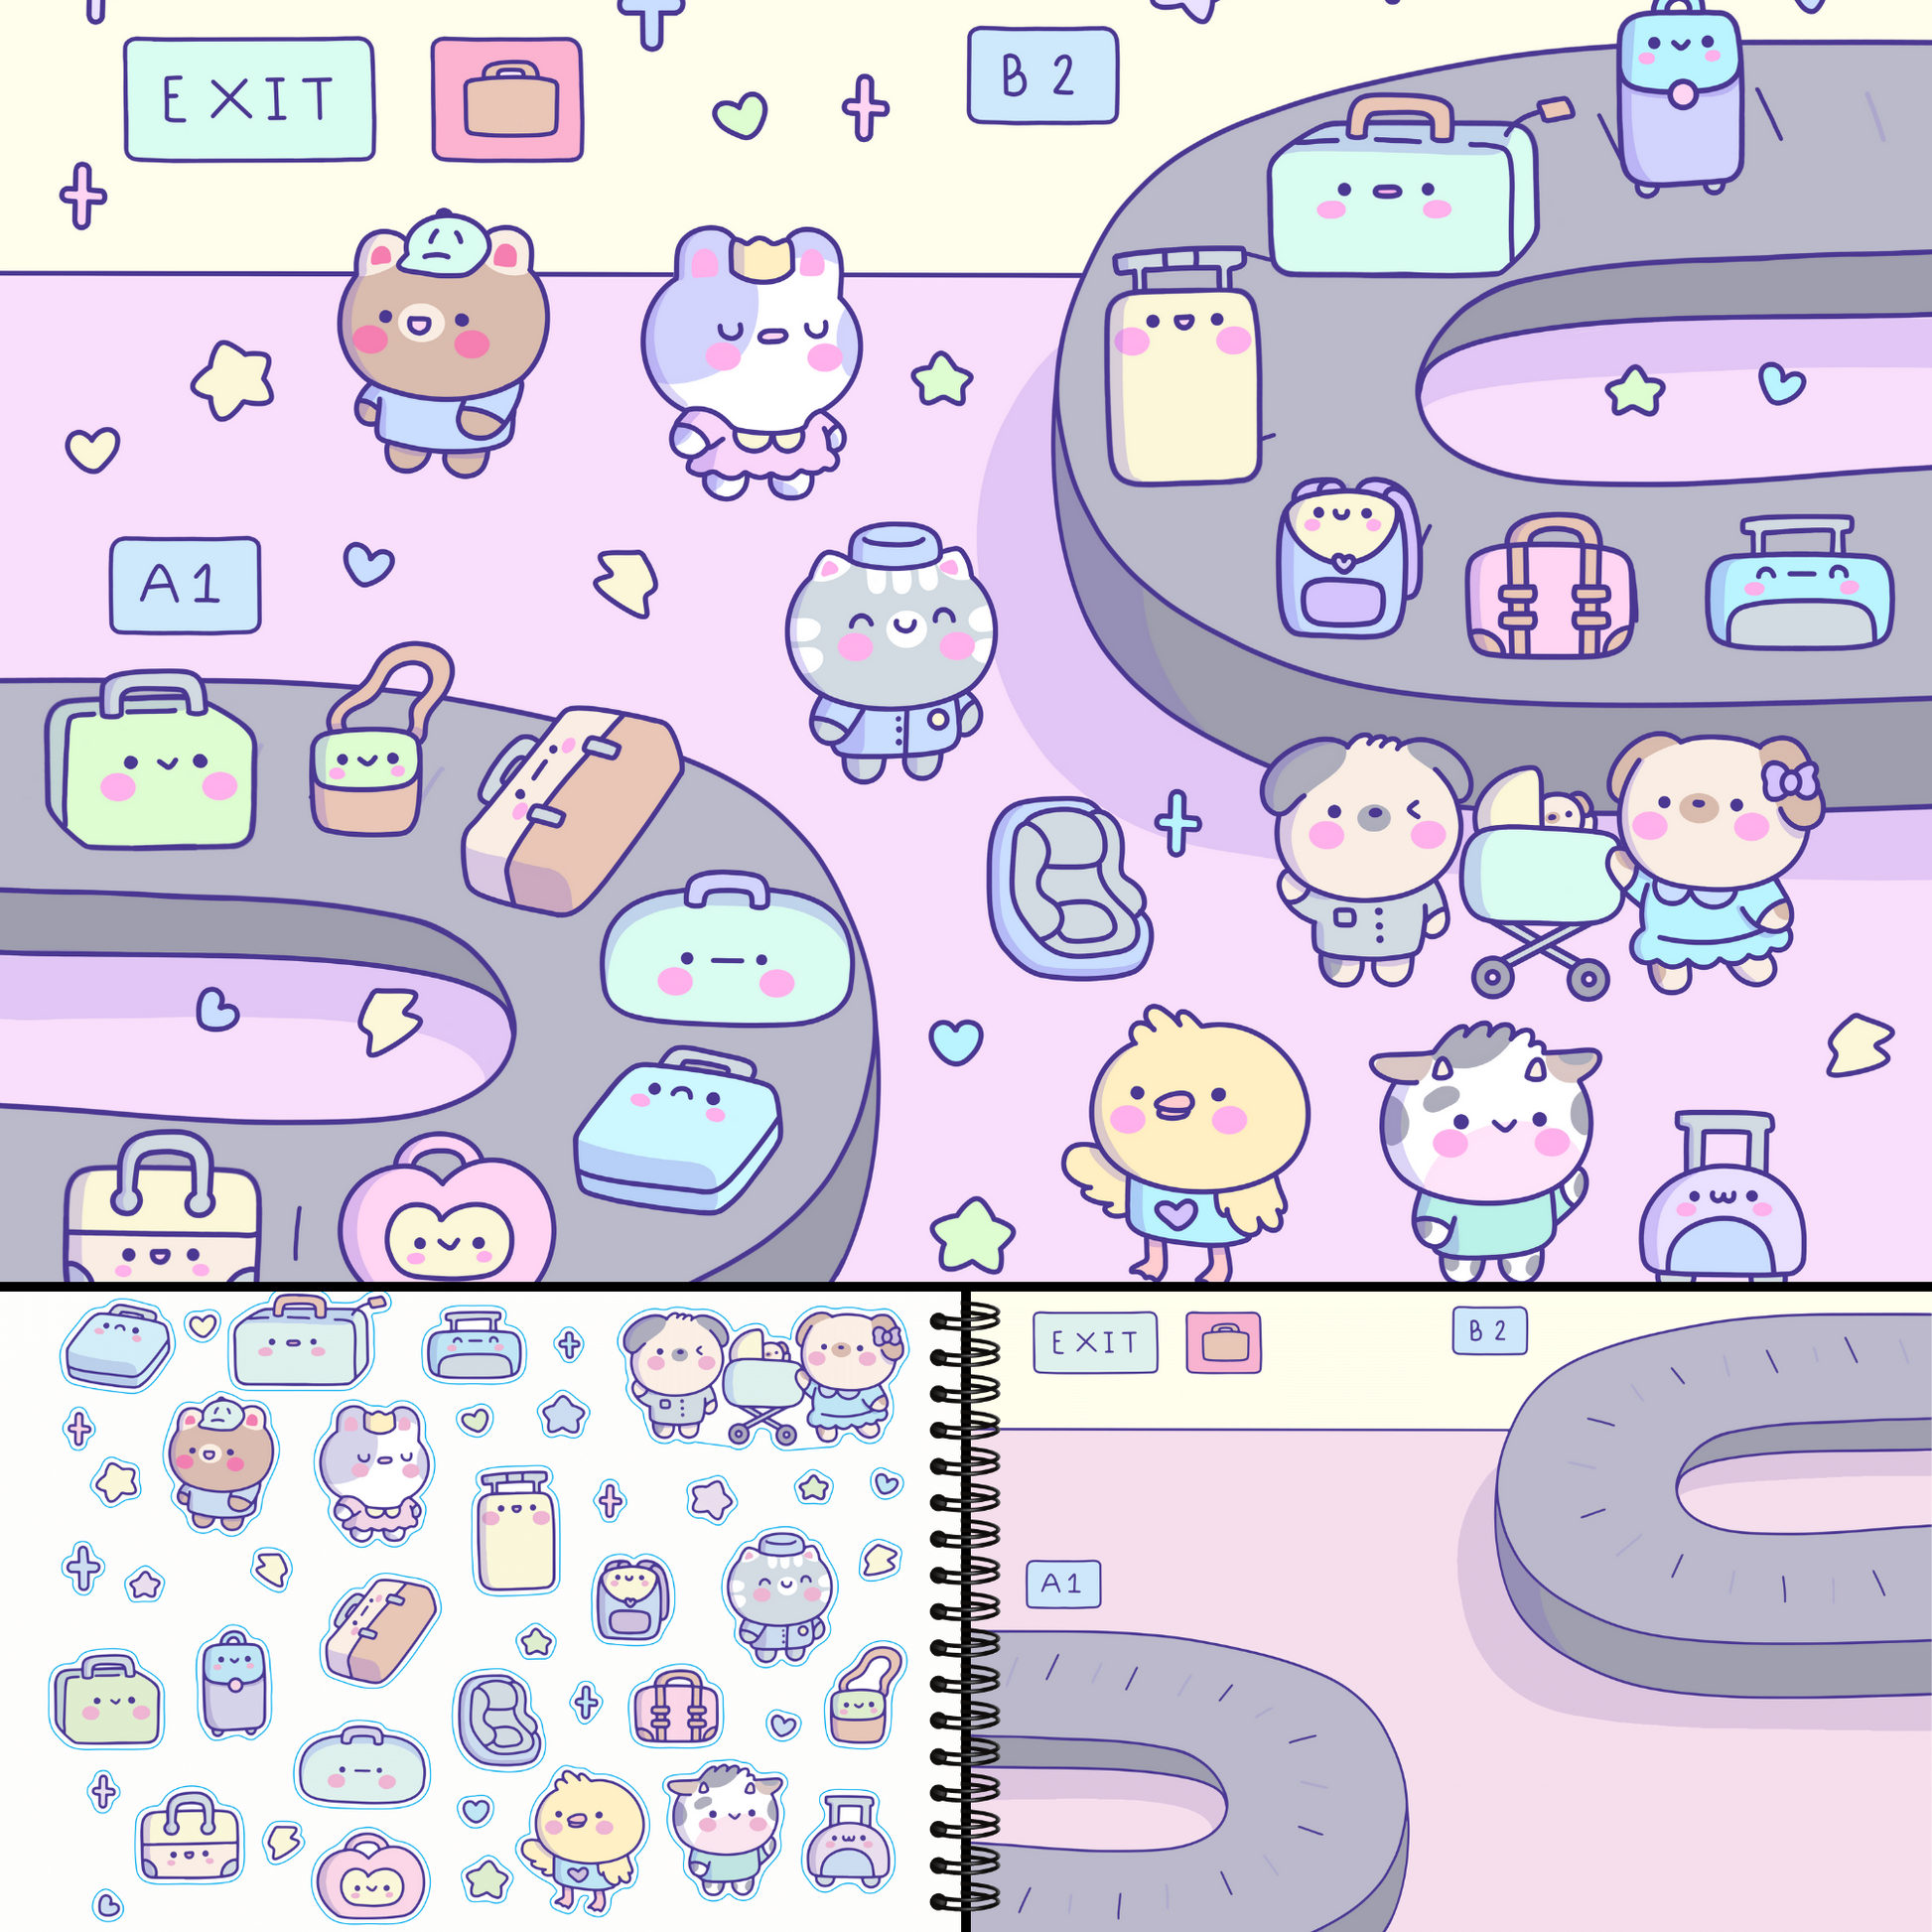 Aesthetic Stickers Your Choice of Sticker SOO Many Cute Stickers